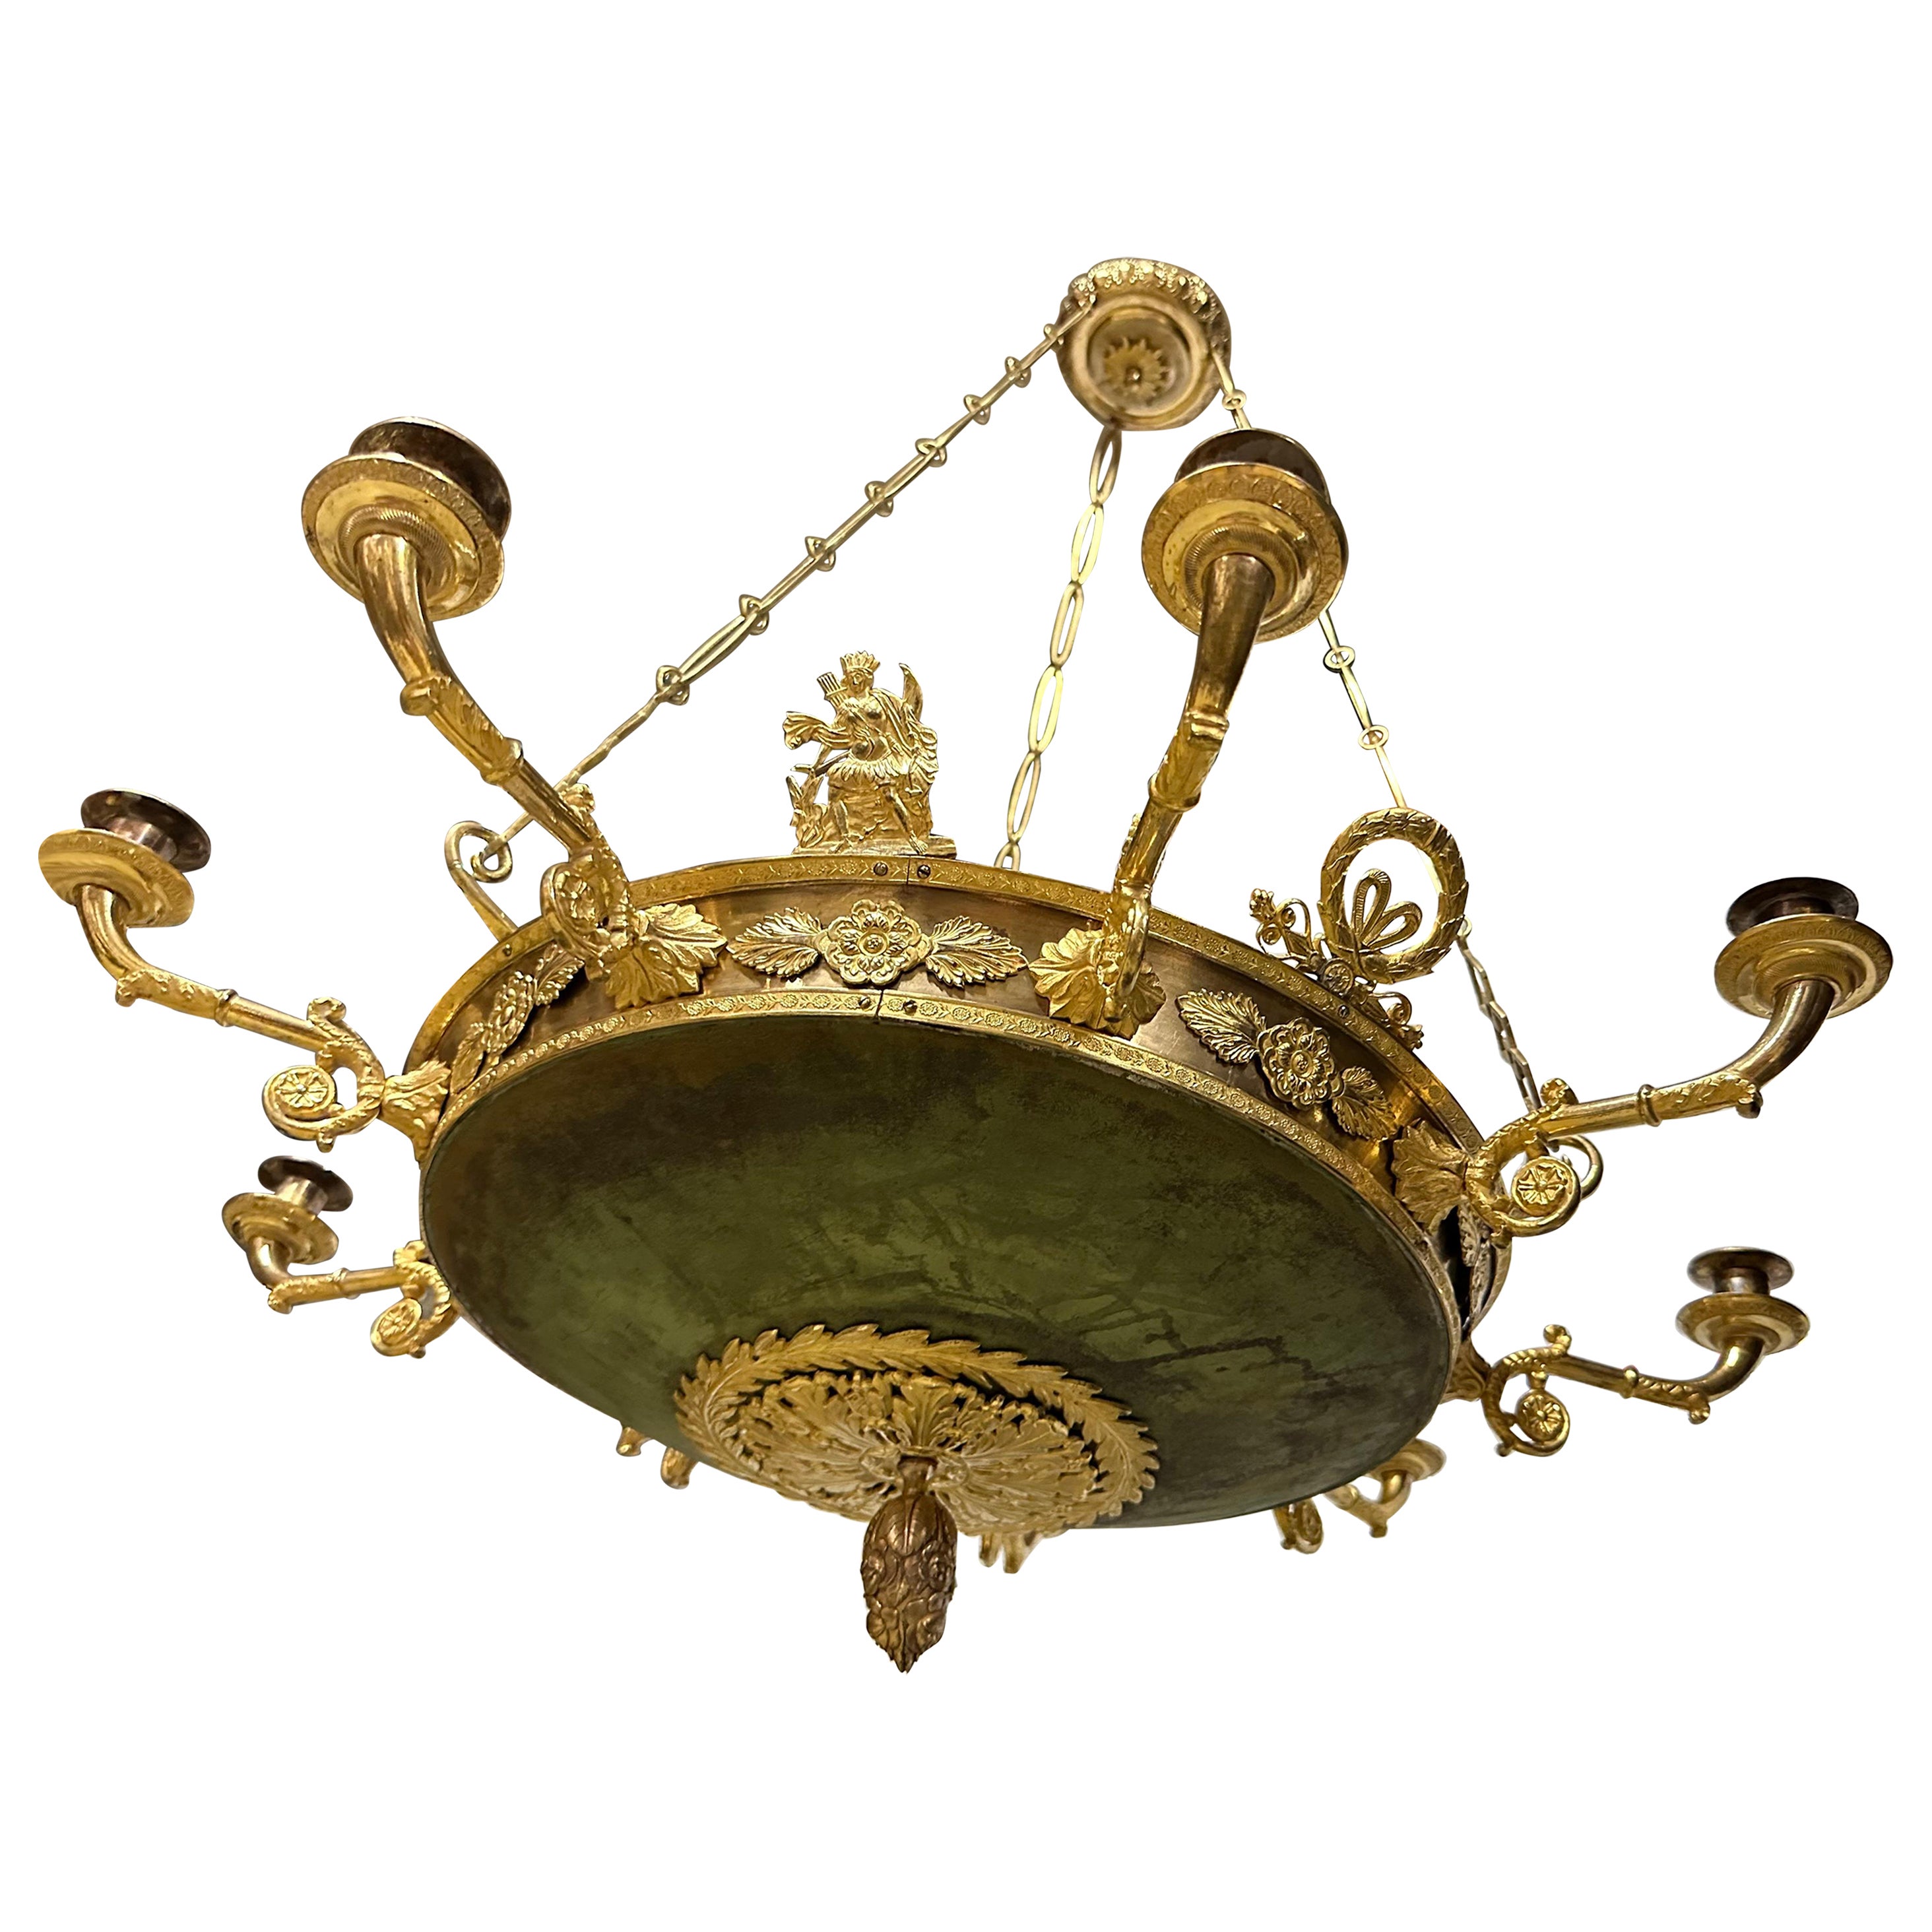 A charming Empire-lamp made around 1820. The large bowl is greenpatinated and the patina is untouched and has a very charming look with its irregularities in colour. The arms and other decorative elements are made of bronze and brass that is